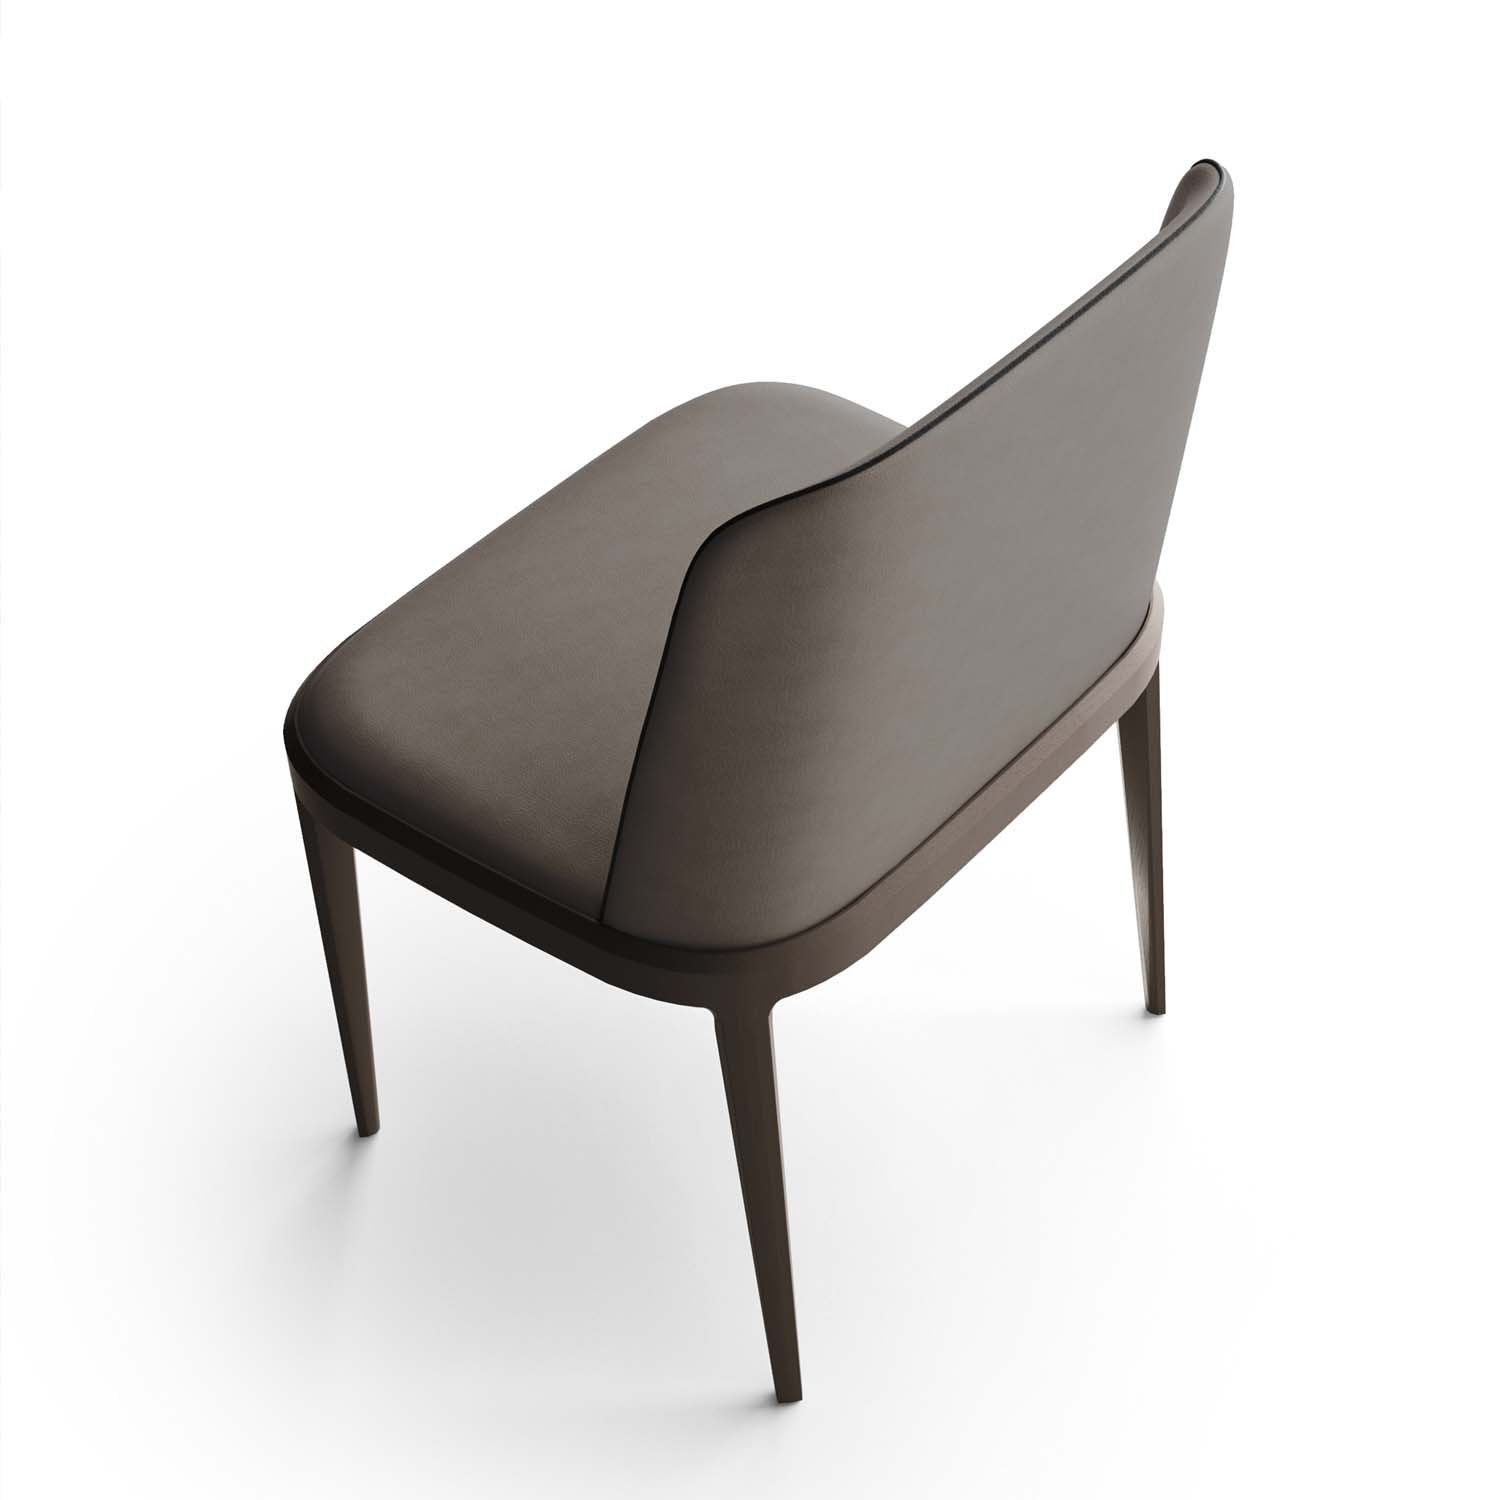 Damble S Enveloping Upholstered Dining Chair by Imperial Line